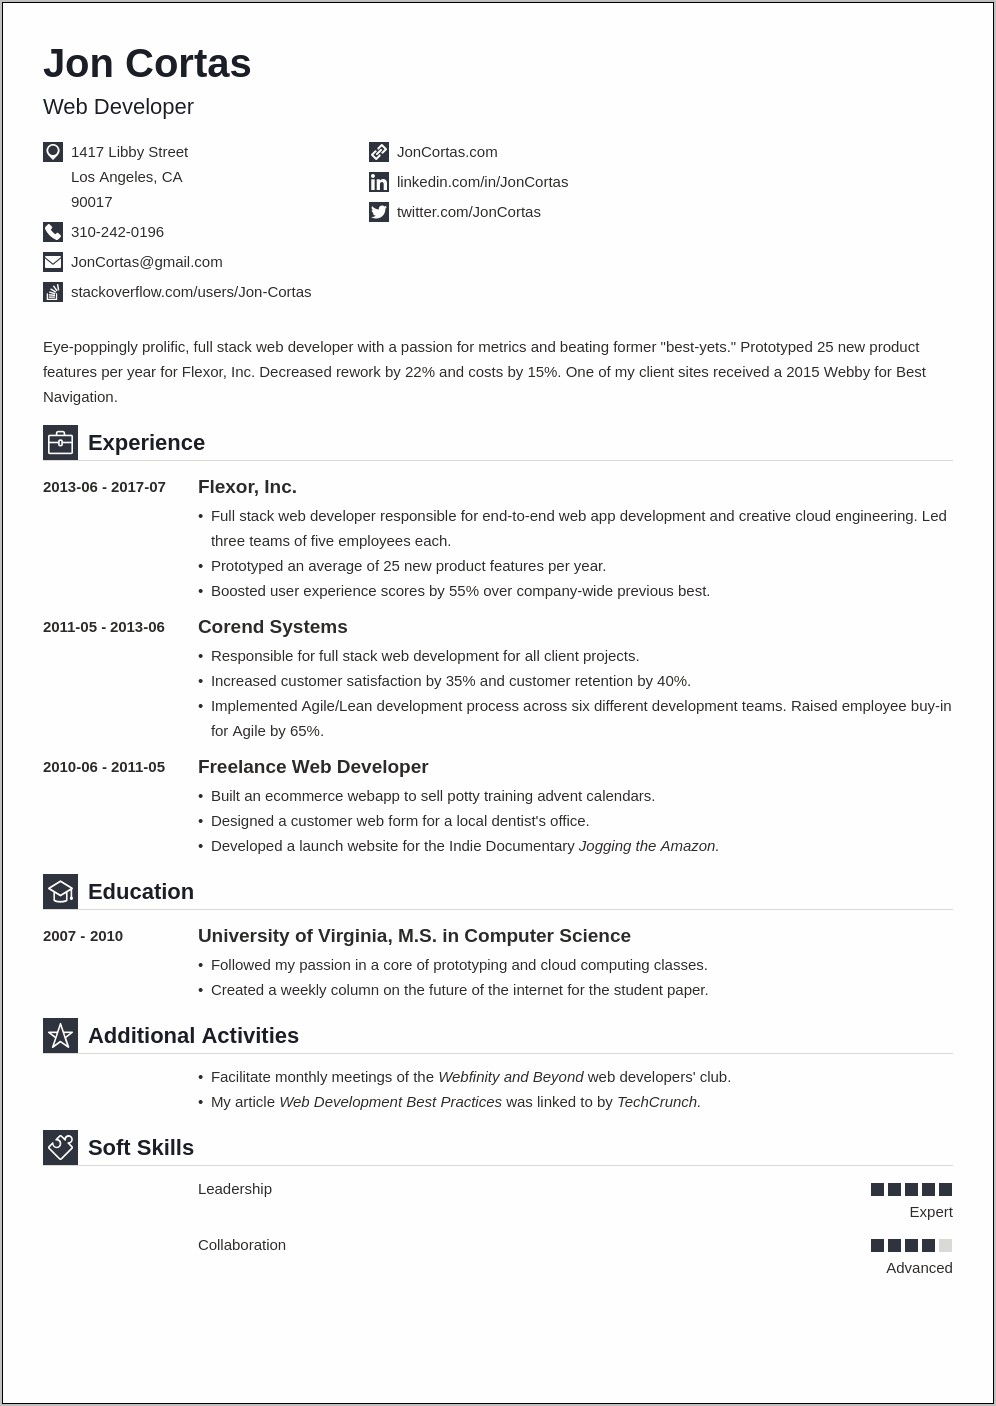 Example Of A Develoer's Resume